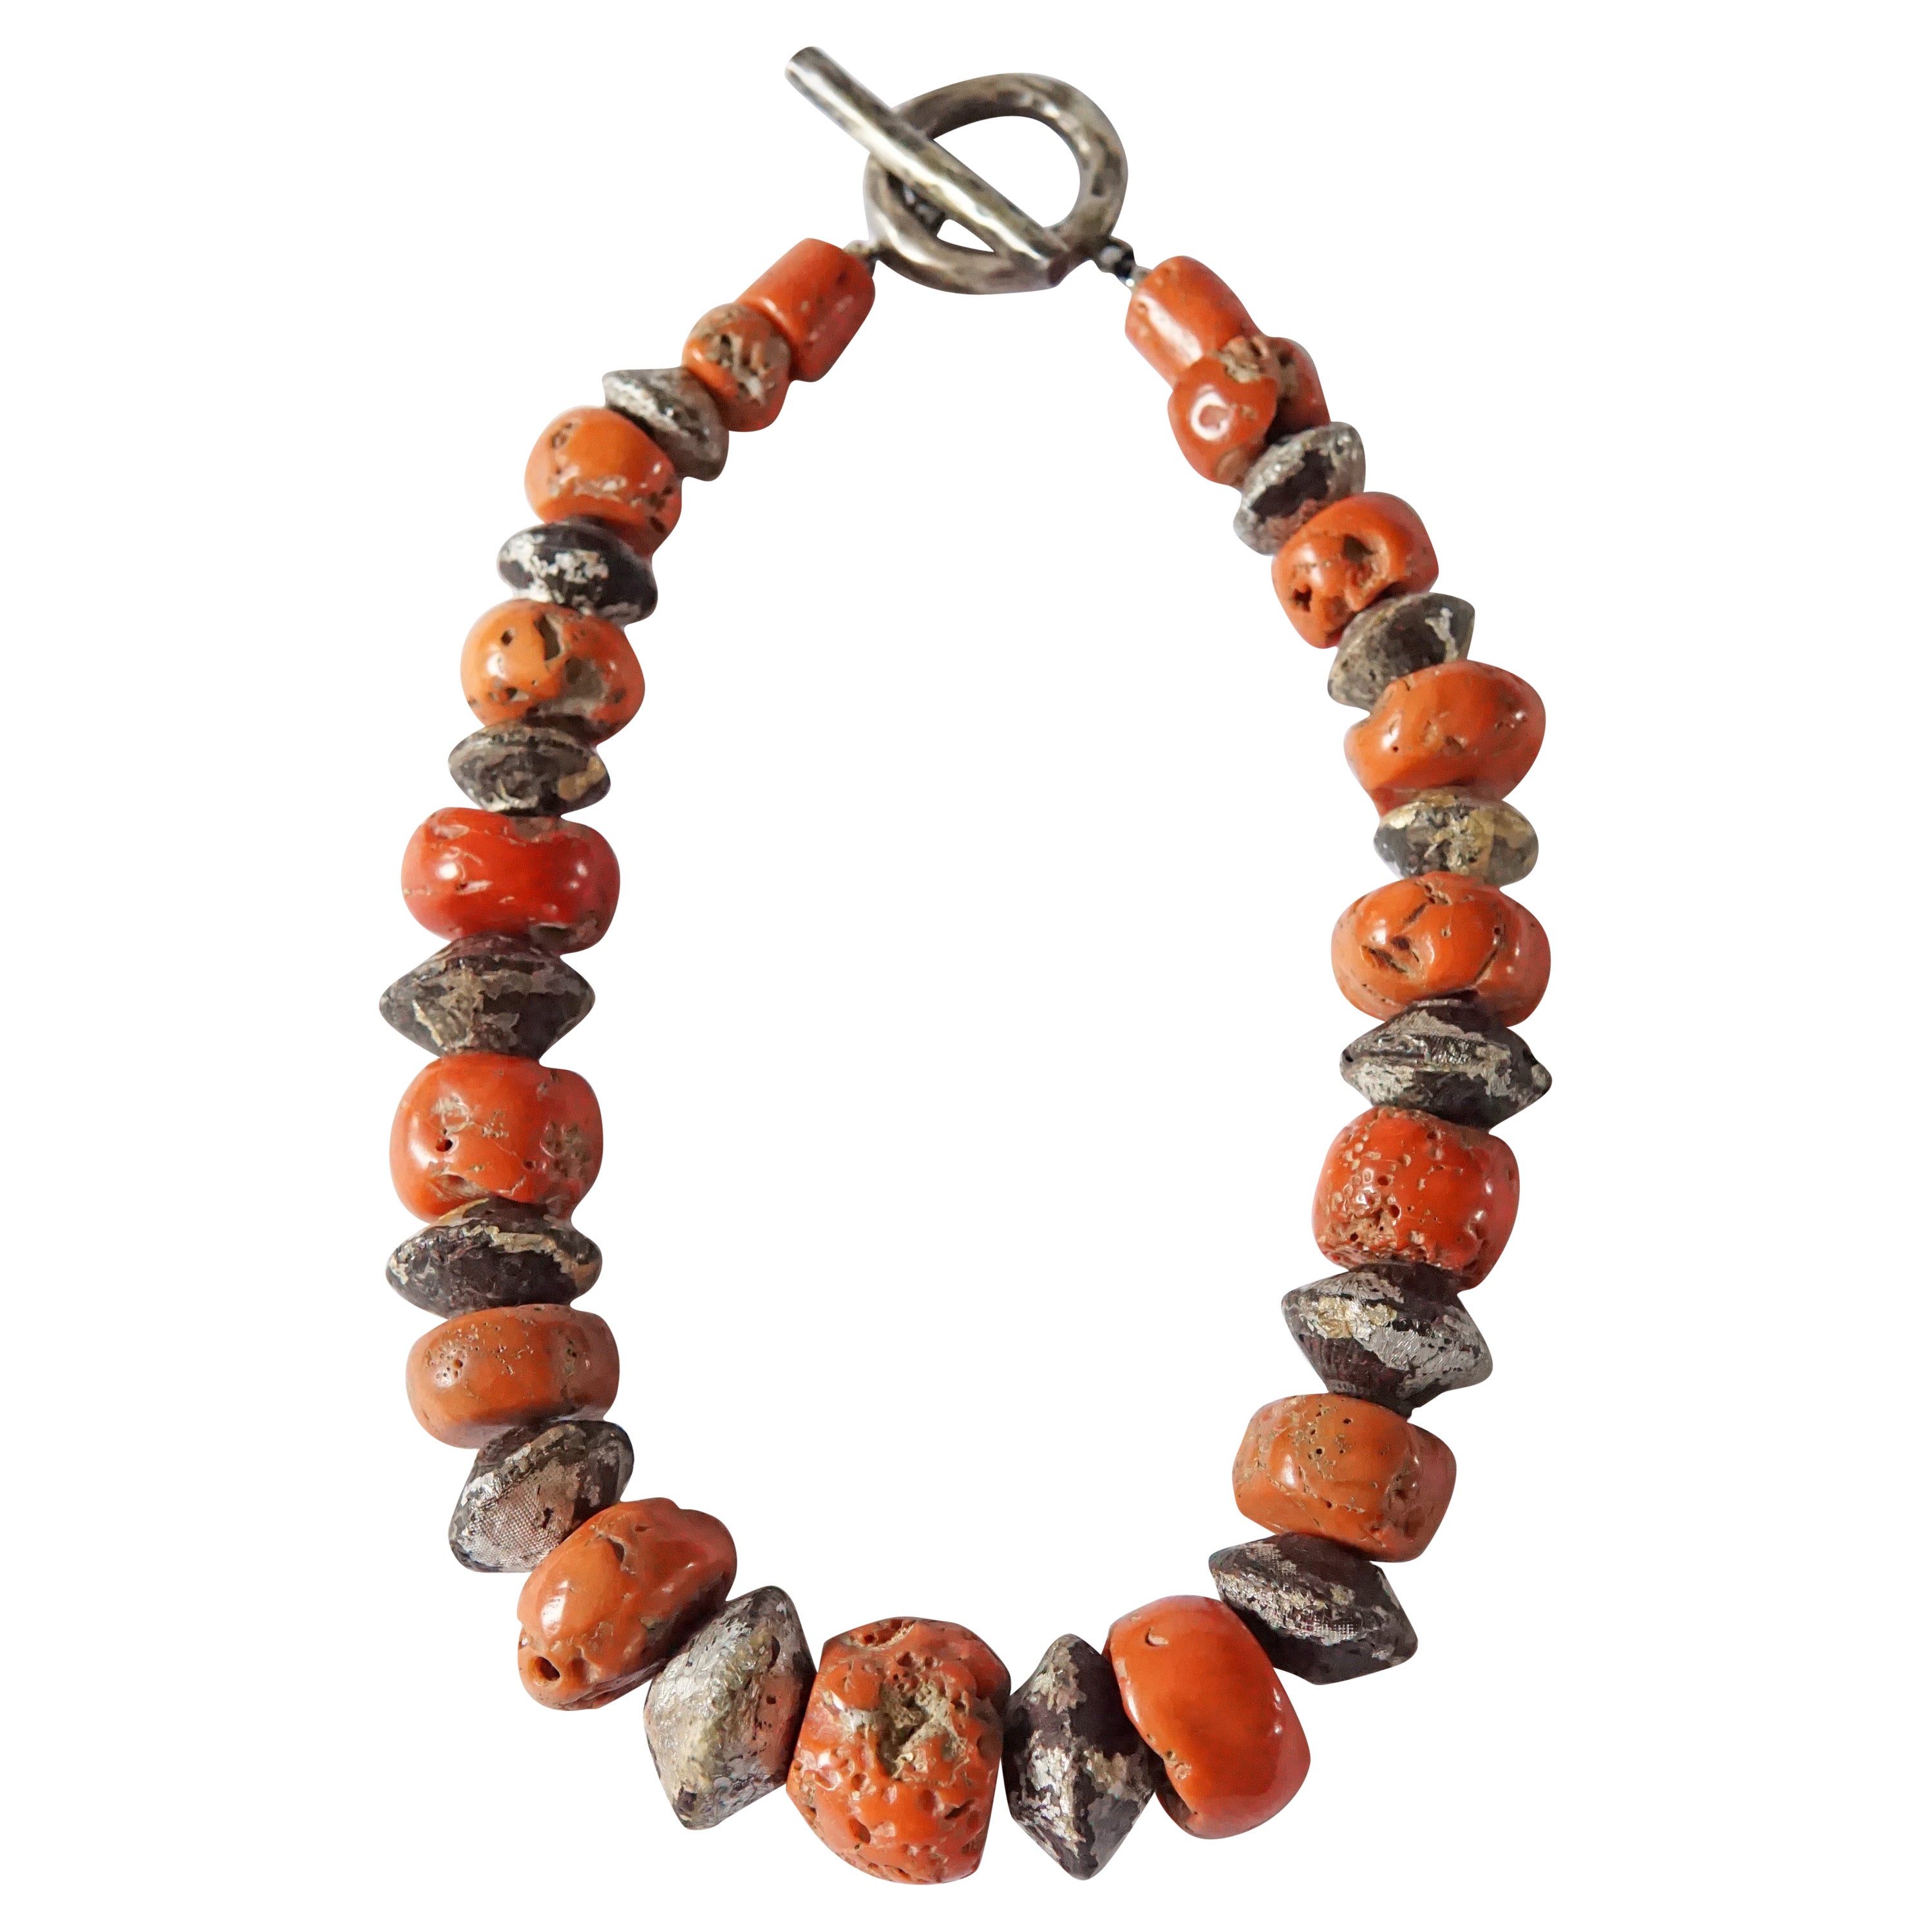 Tibetan Coral Necklace with Silver Painted Wooden Beads c. 1900  For Sale